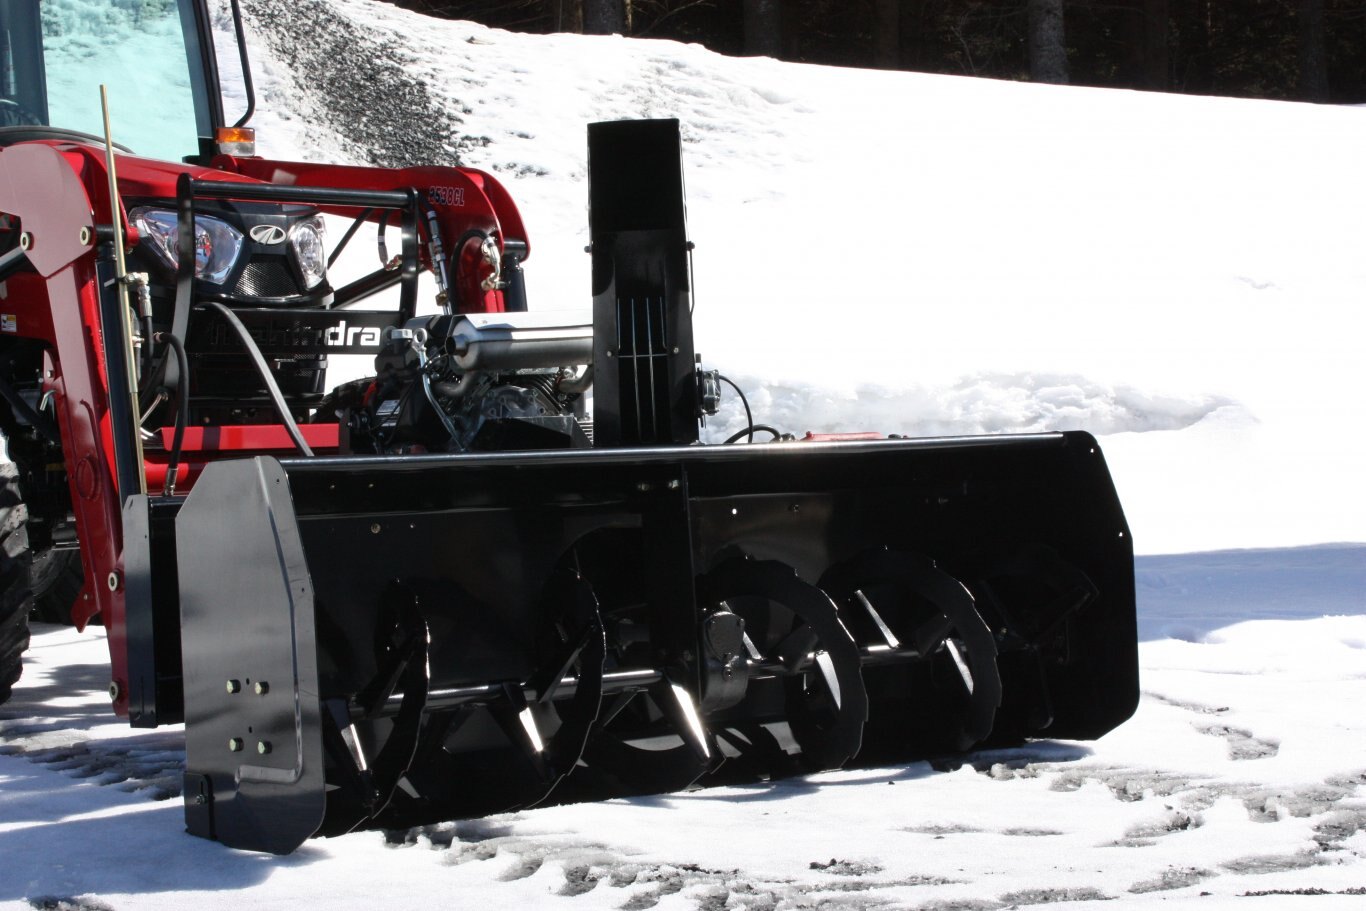 Bercomac 66? Vantage Snowblower for tractors equipped with Skid Steer style attach